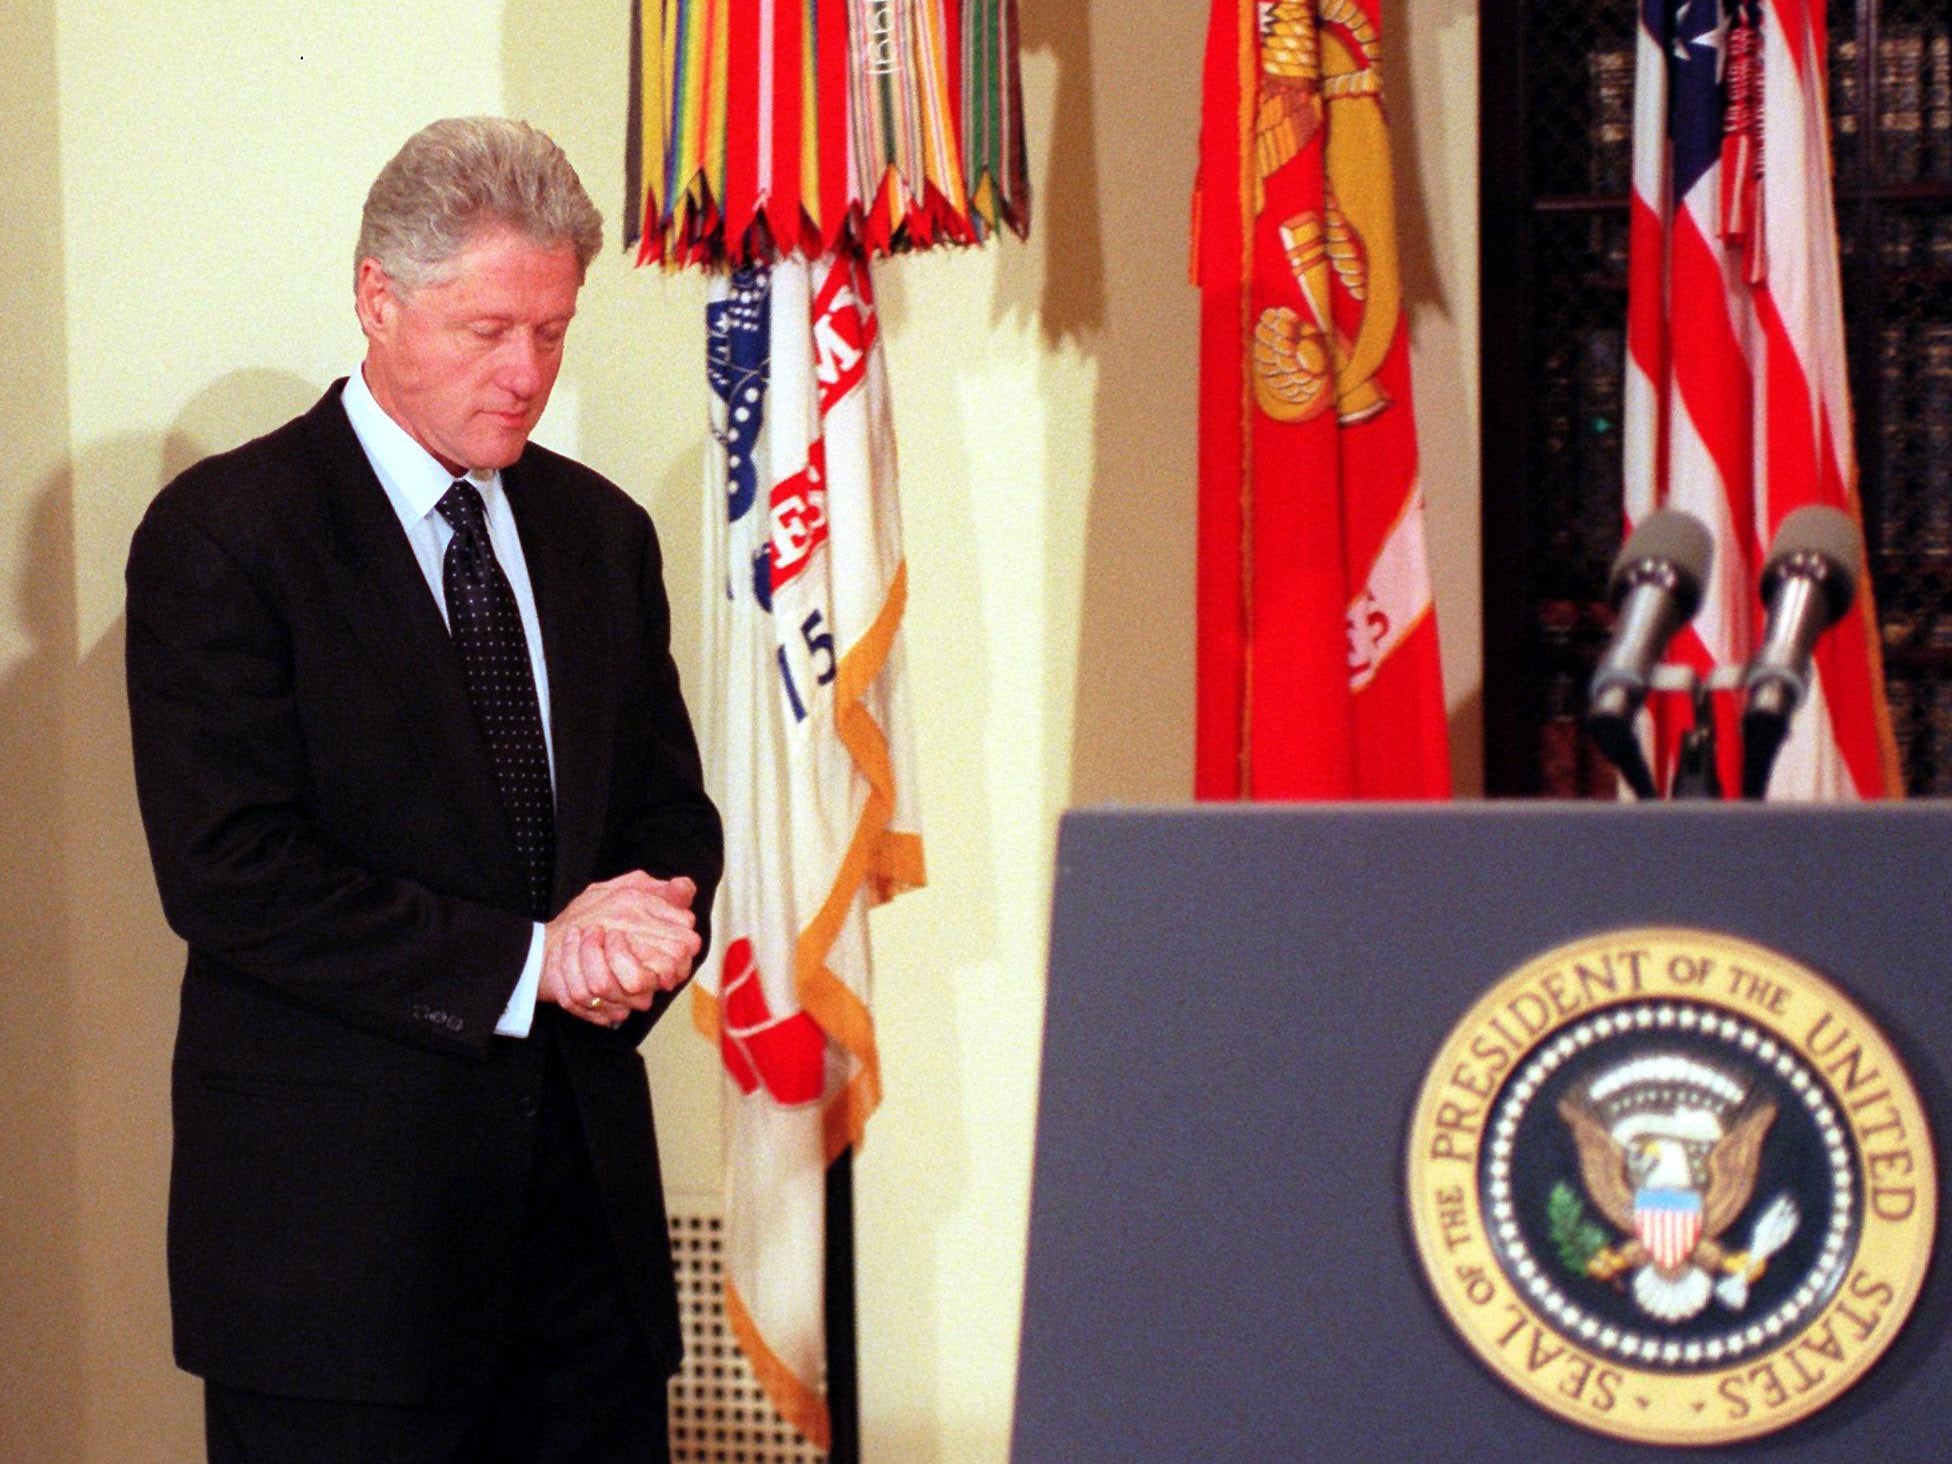 Bill Clinton was impeached during his second term, and then swiftly acquitted